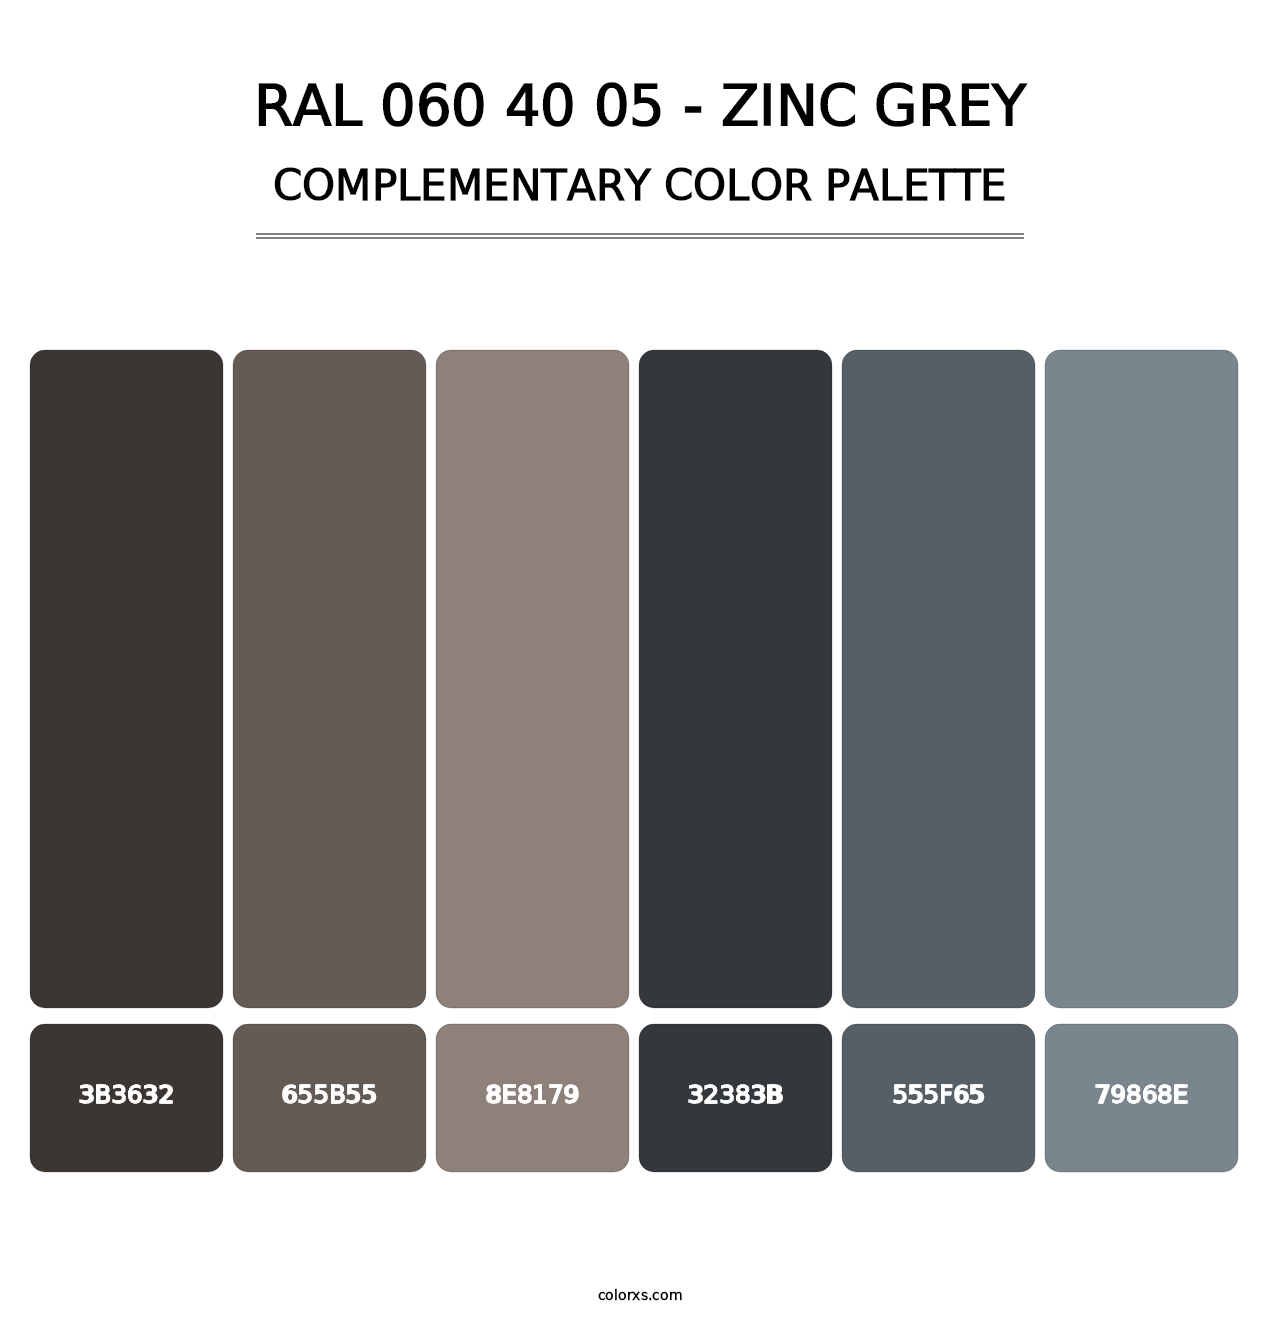 RAL 060 40 05 - Zinc Grey - Complementary Color Palette